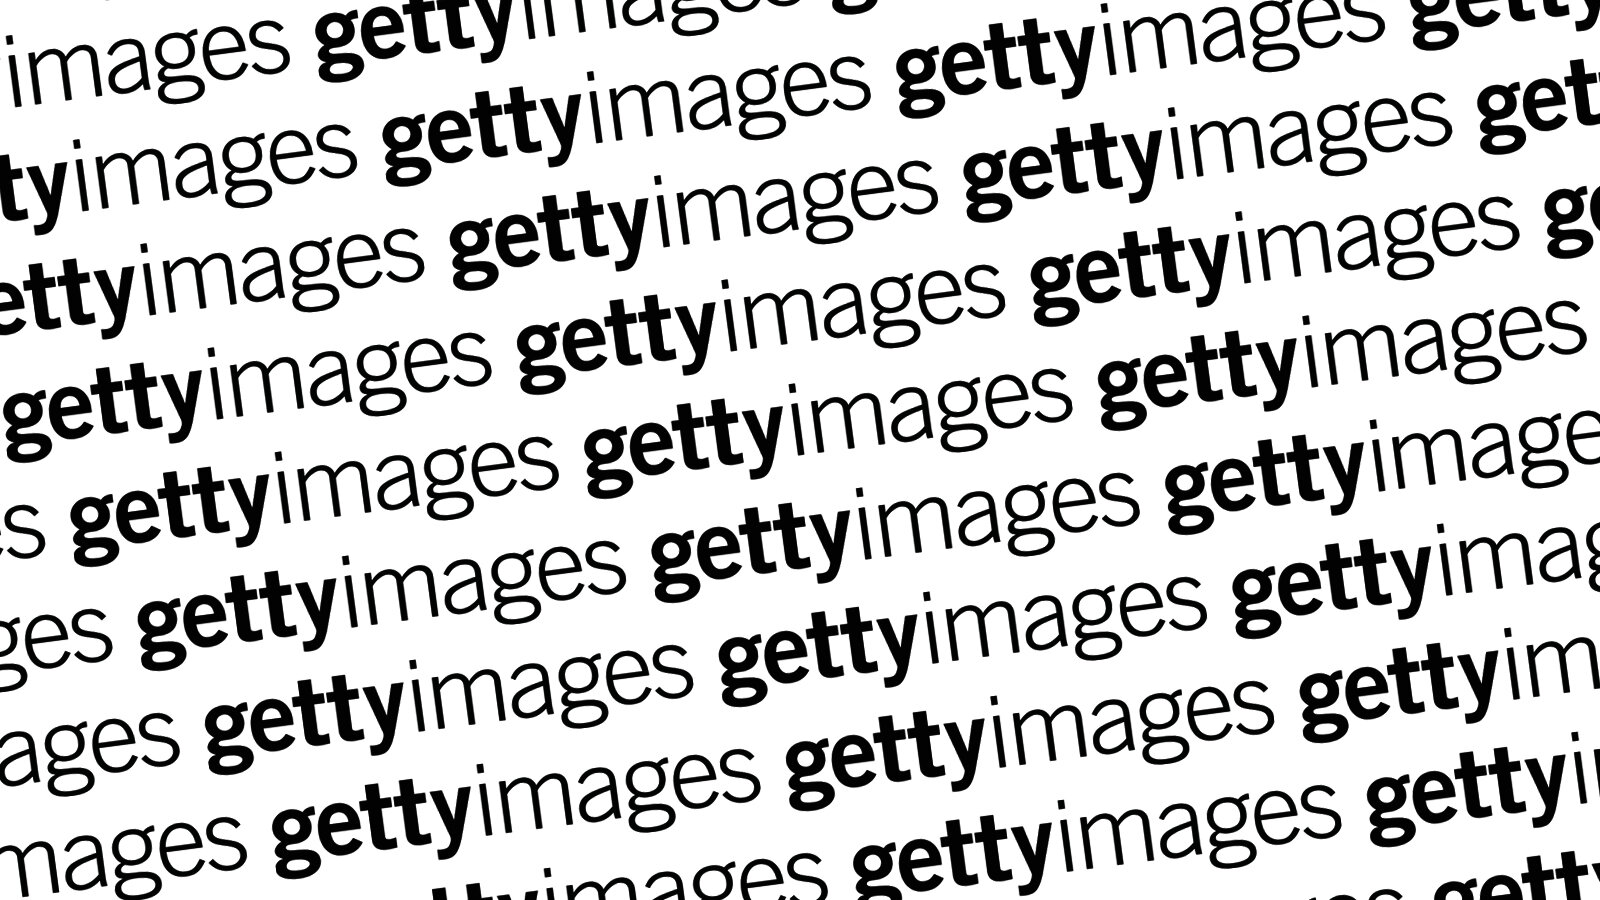   A look at content licensing company Getty Images (plus how to get hired)  